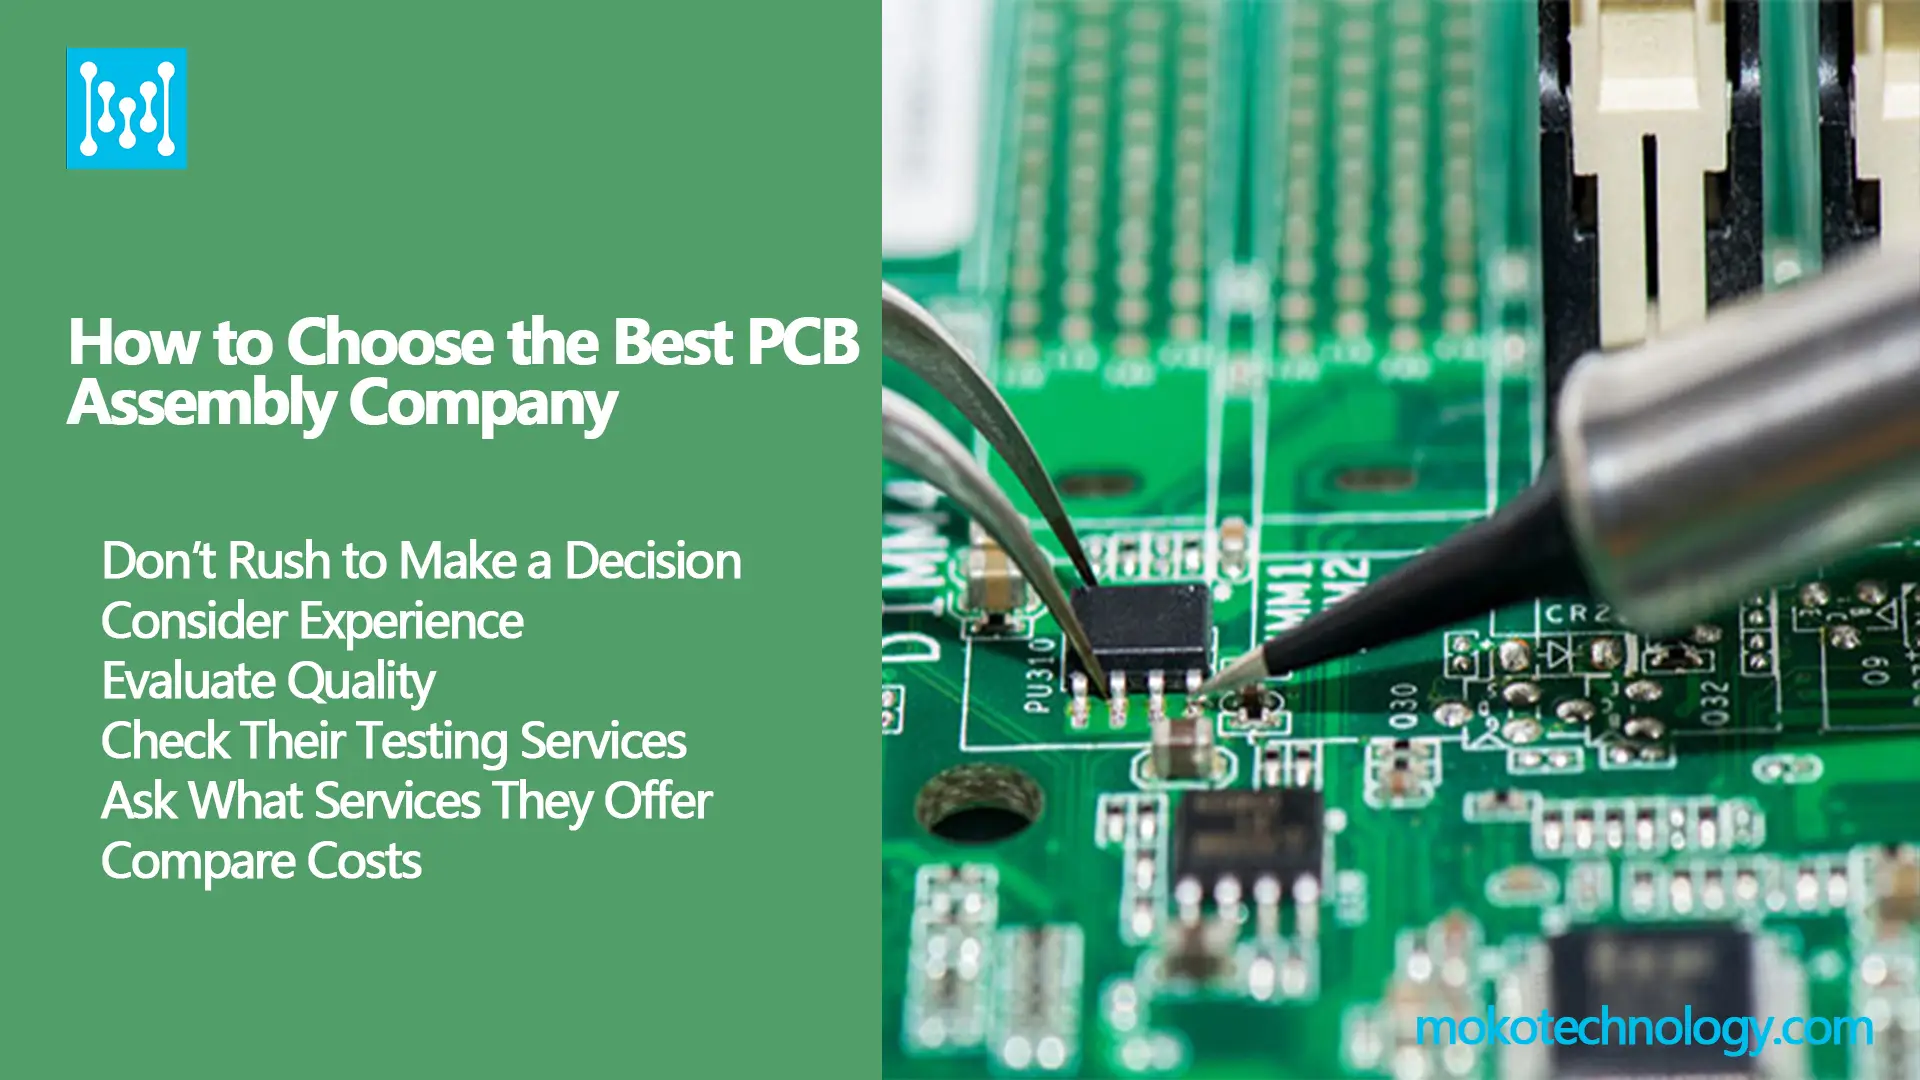 How to Choose the Best PCB Assembly Company